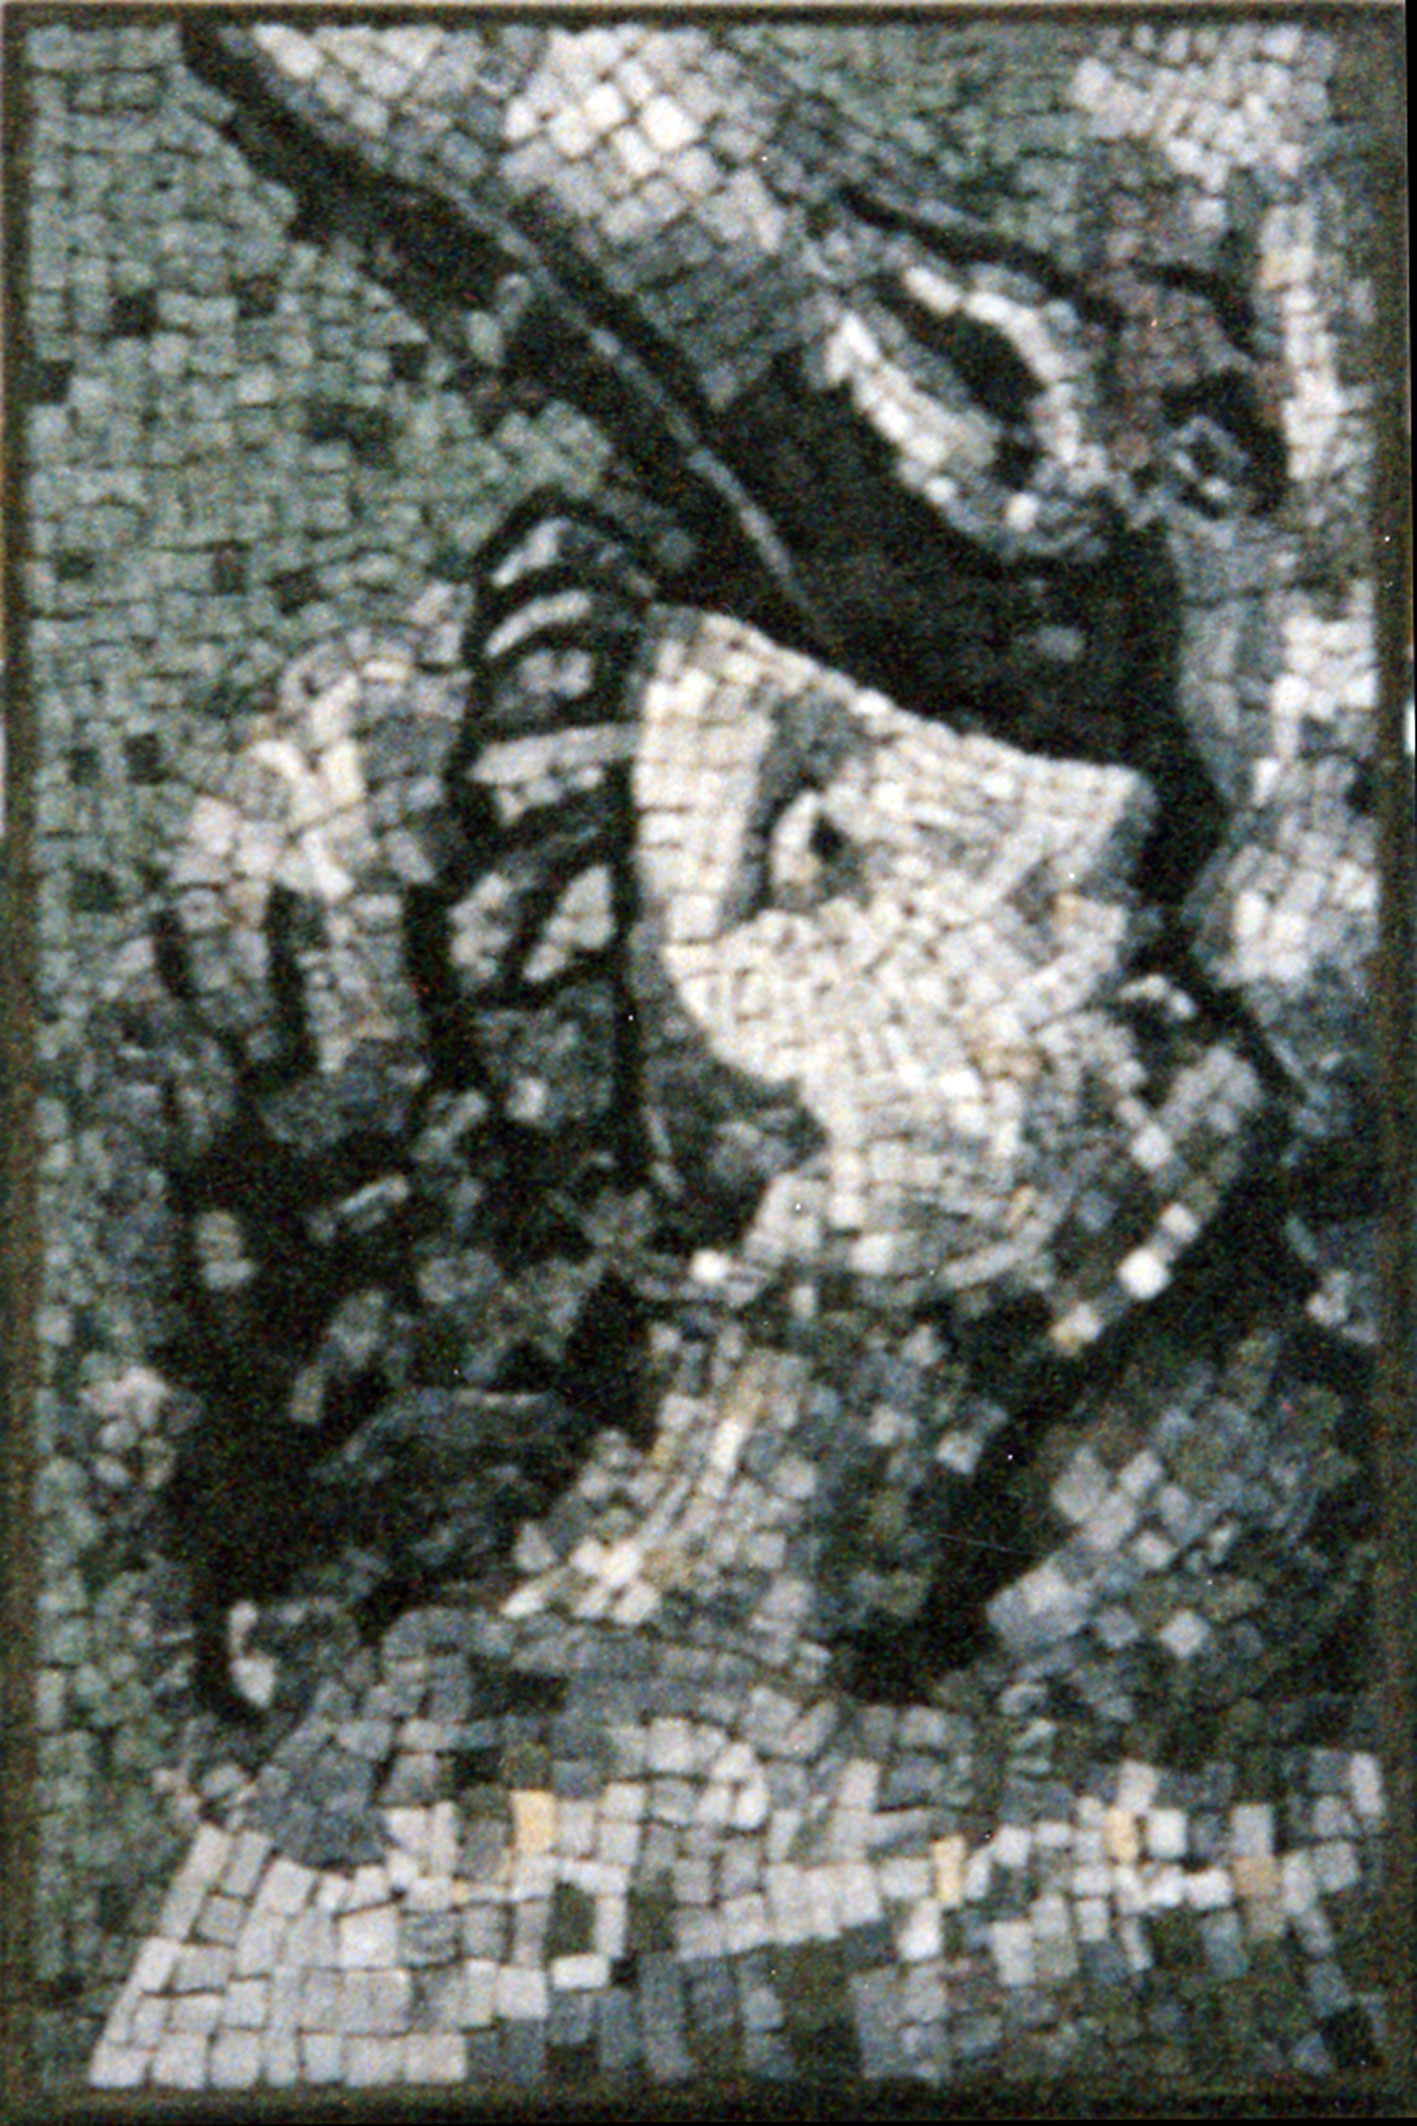 mosaico_in_marmo_40x30_1998